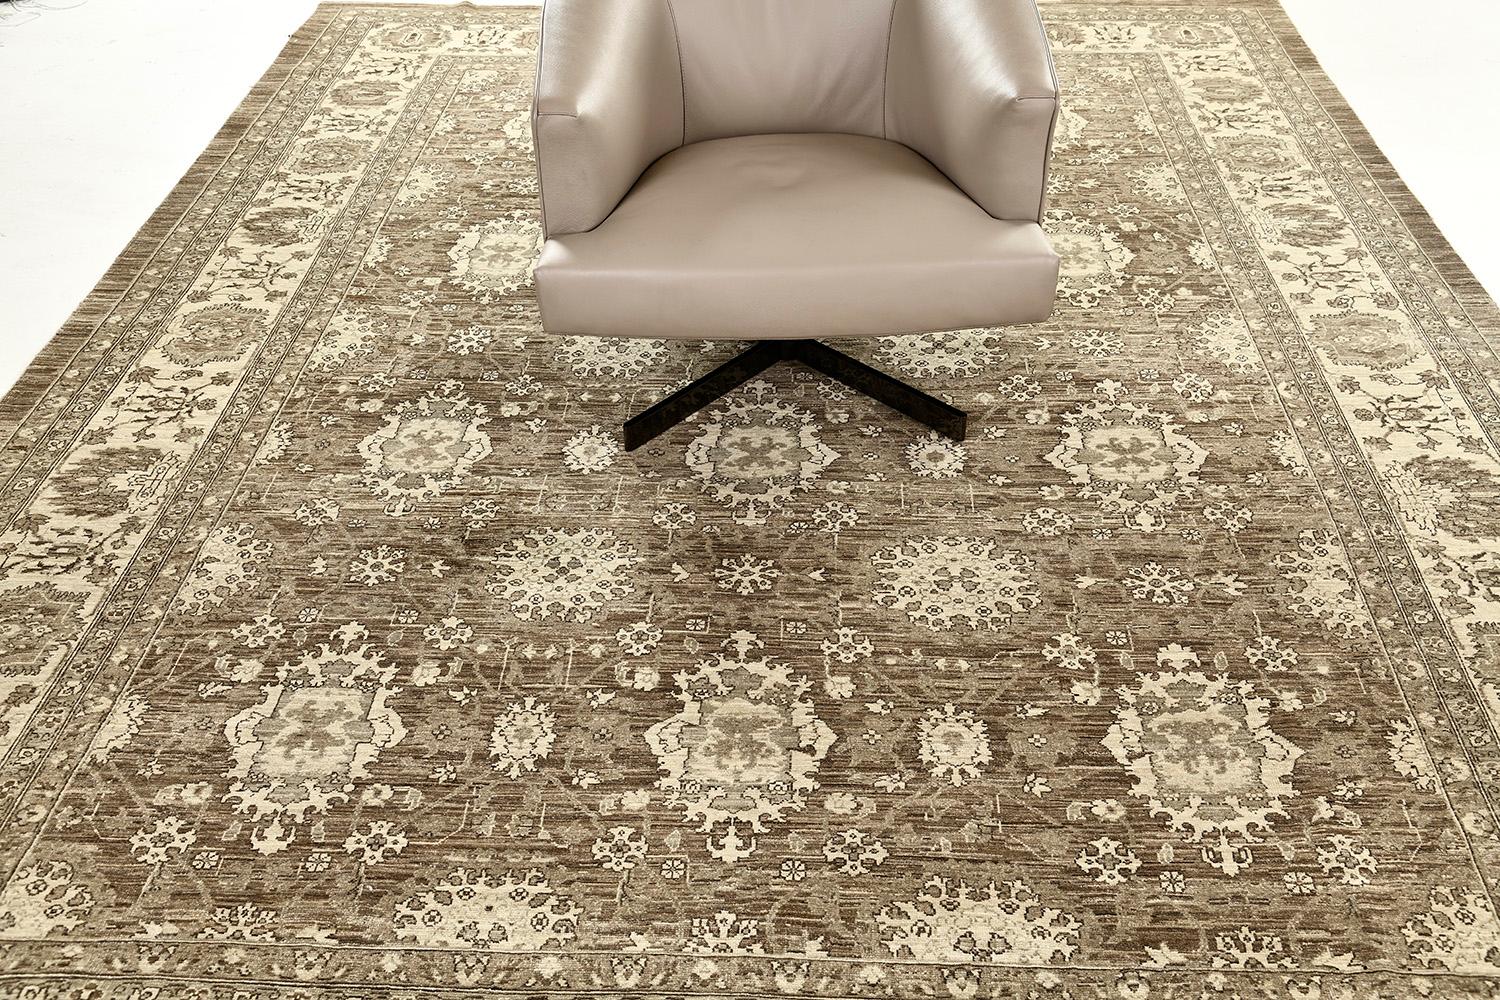 This enchanting revival of the Mahal rug has created an impressive pattern. Featuring the well-coordinated neutral tones and palette of umber brown, this elegant rug is composed of enchanting florid elements forming different grandiose medallions